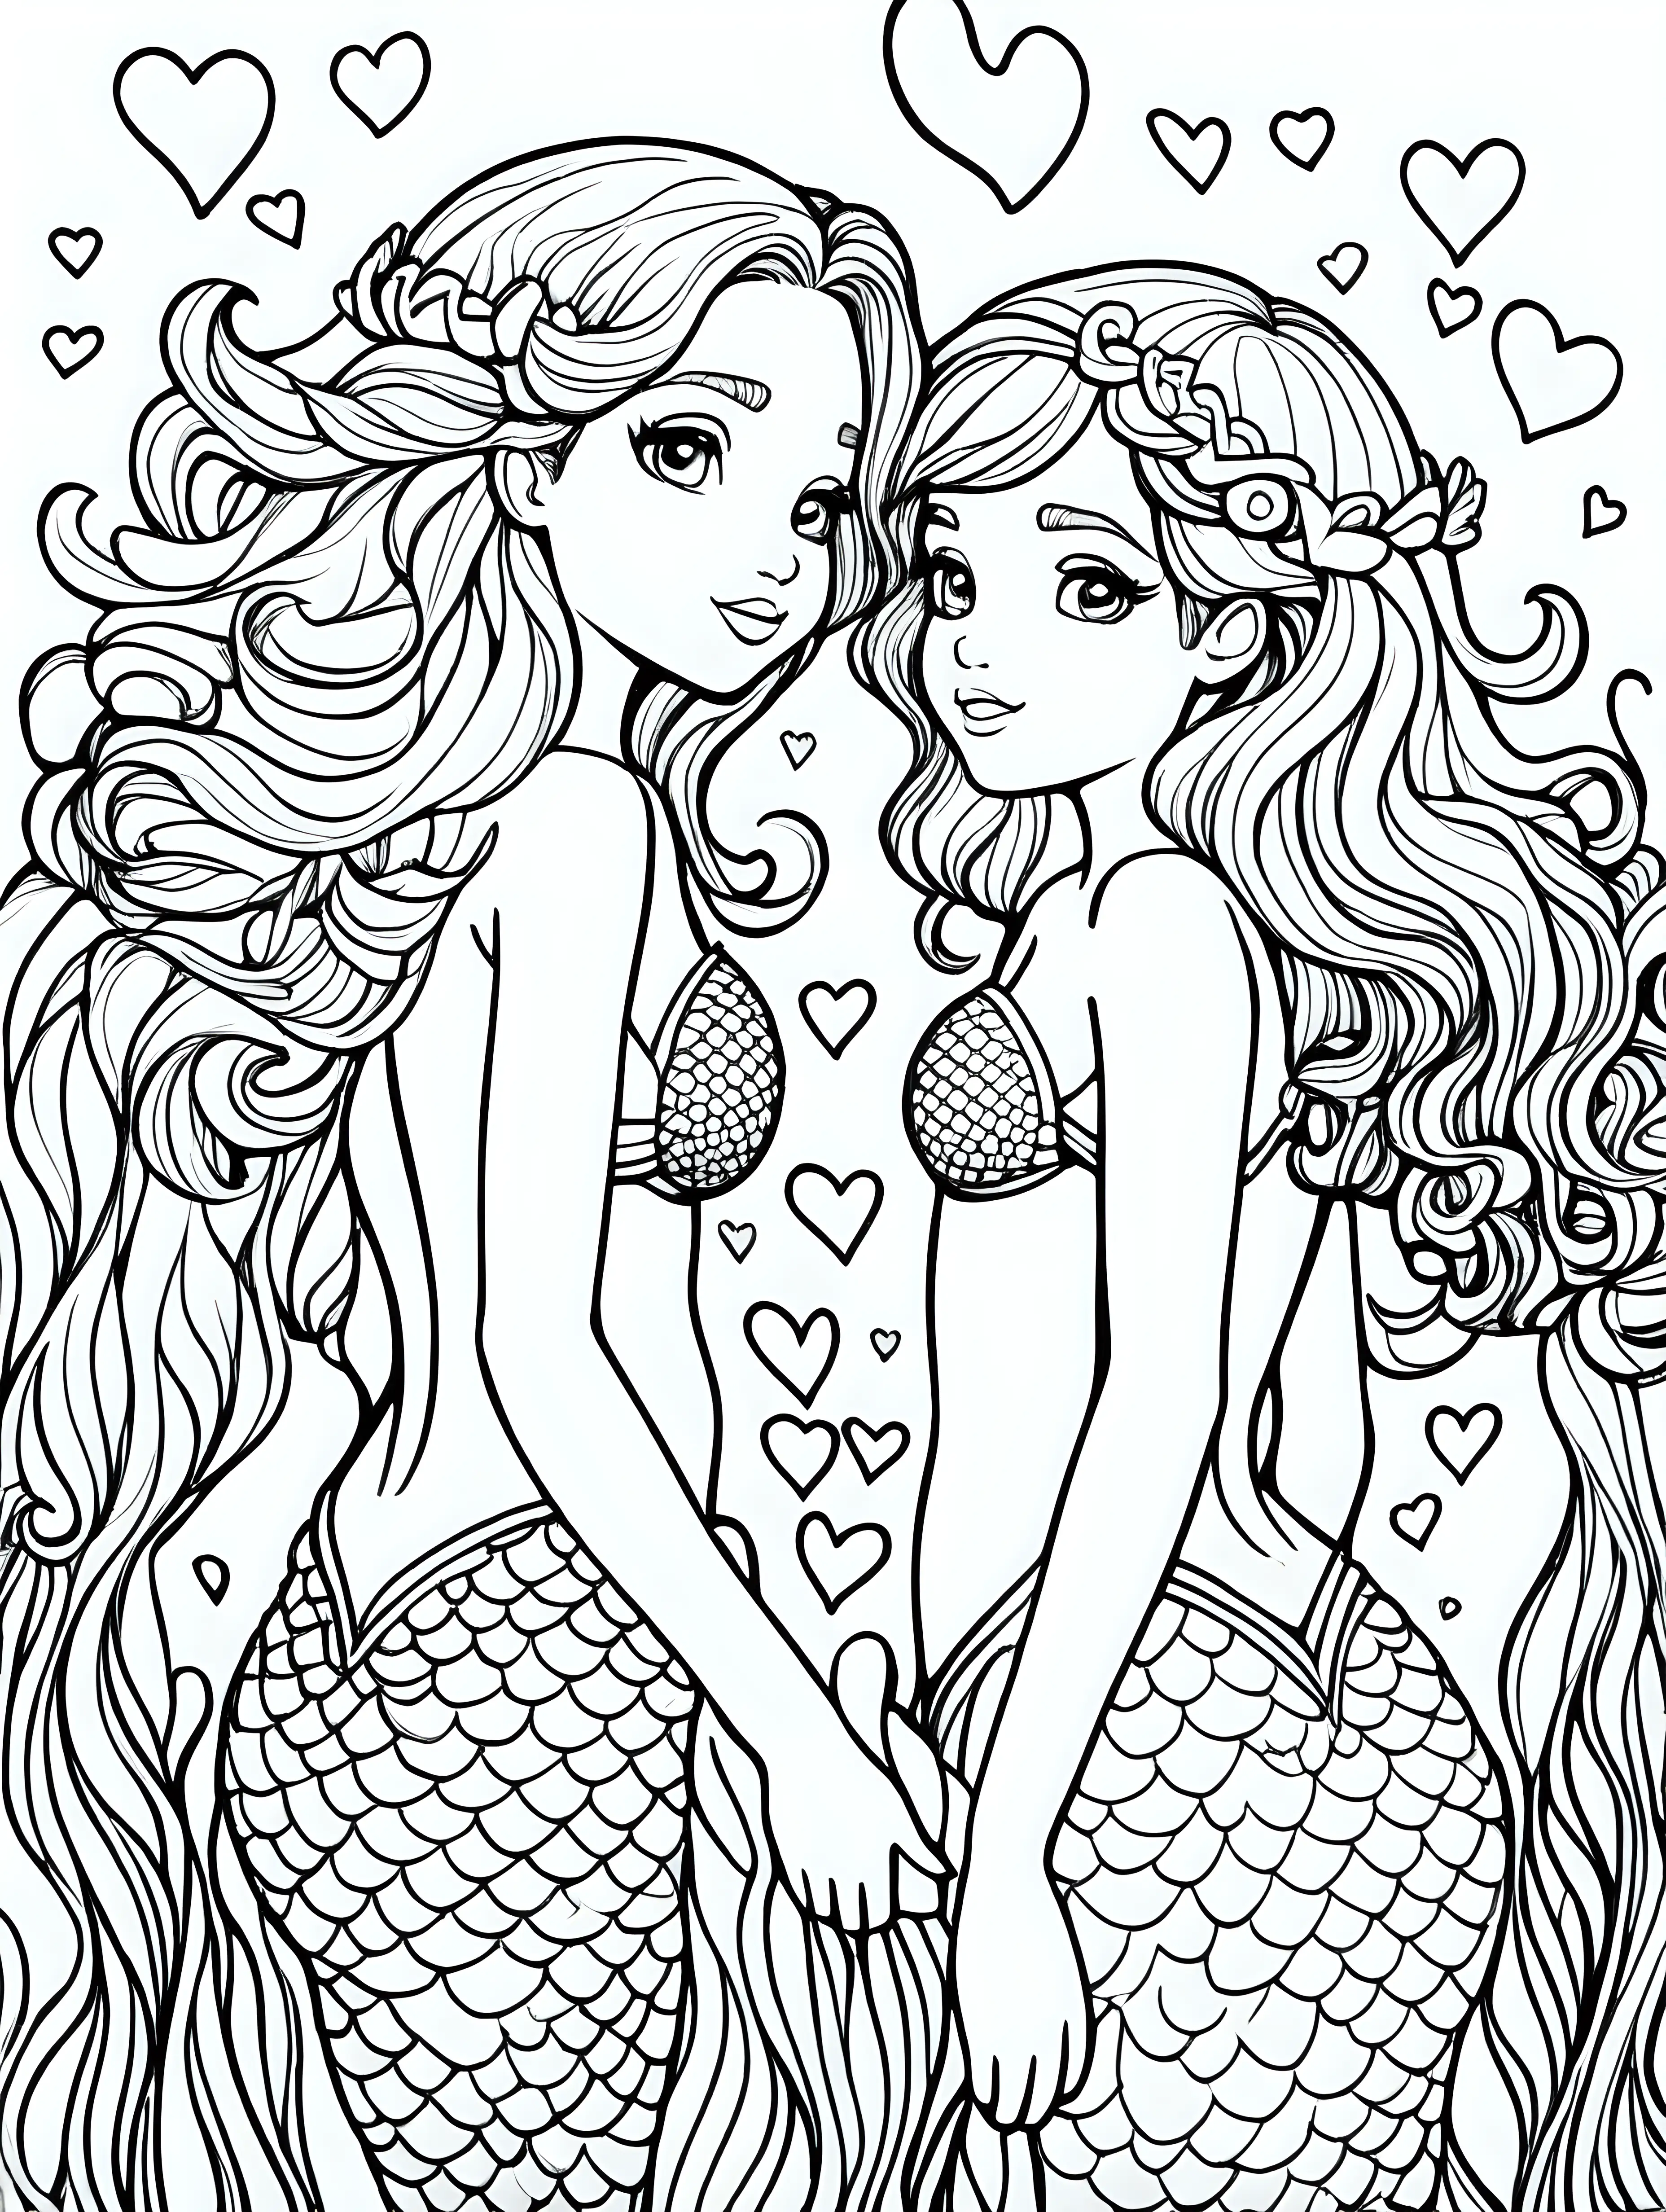 create a black line detailed sketch illustration coloring page of cute mermaids in the ocean surrounded with hearts, crisp black outlines, no shading